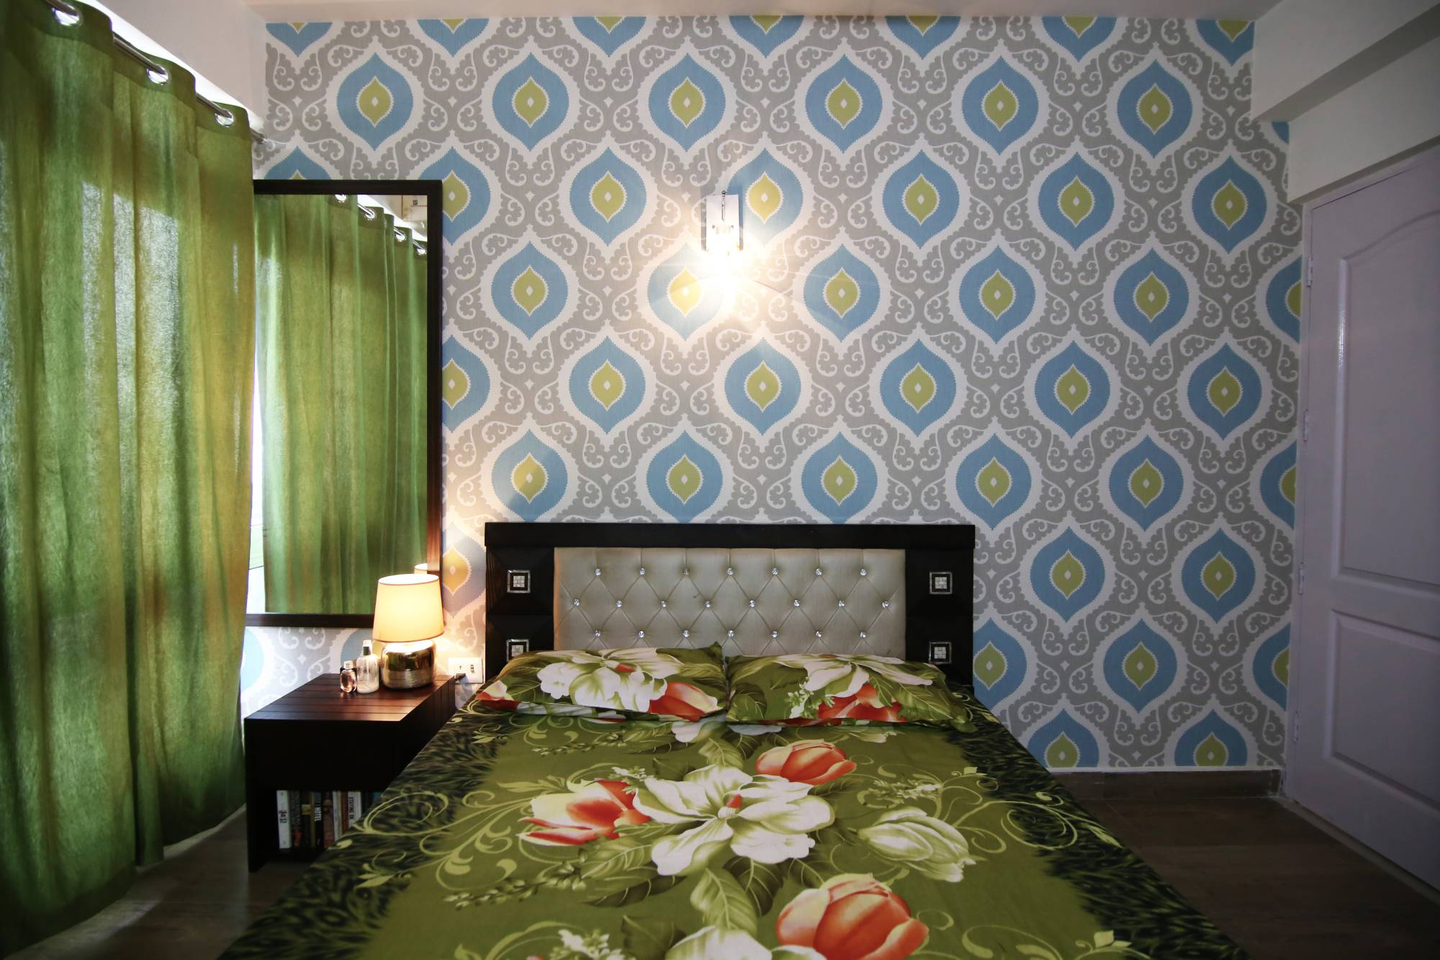 Guest Room With Patterned Wallpaper - Livspace